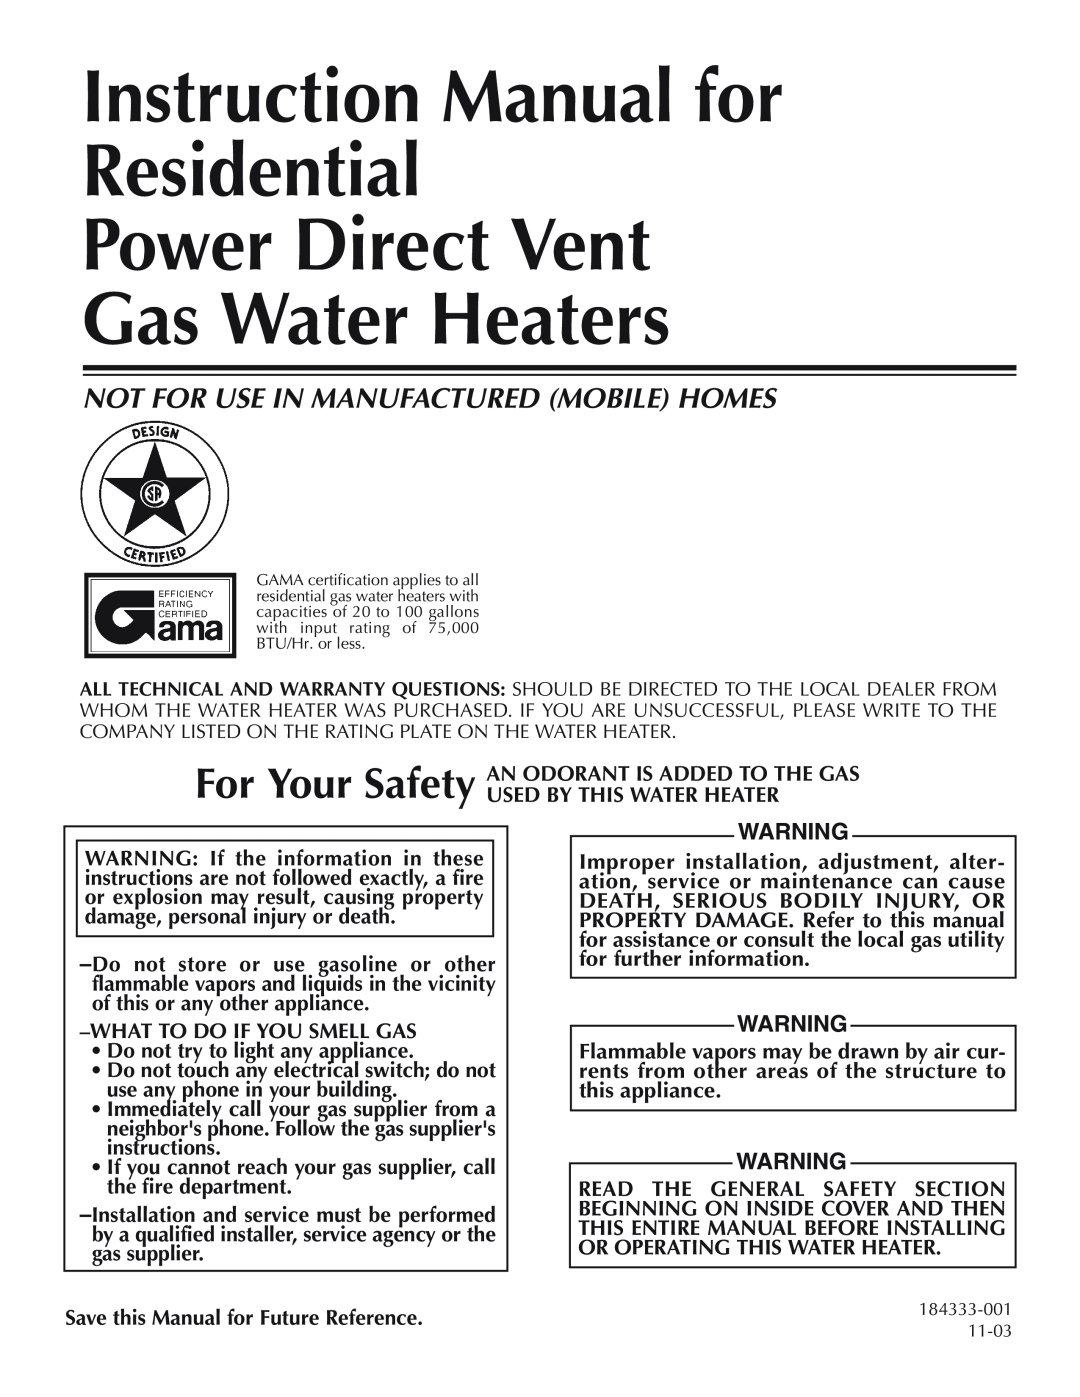 Reliance Water Heaters 11-03, 606, 184333-001 instruction manual Power Direct Vent Gas Water Heaters 